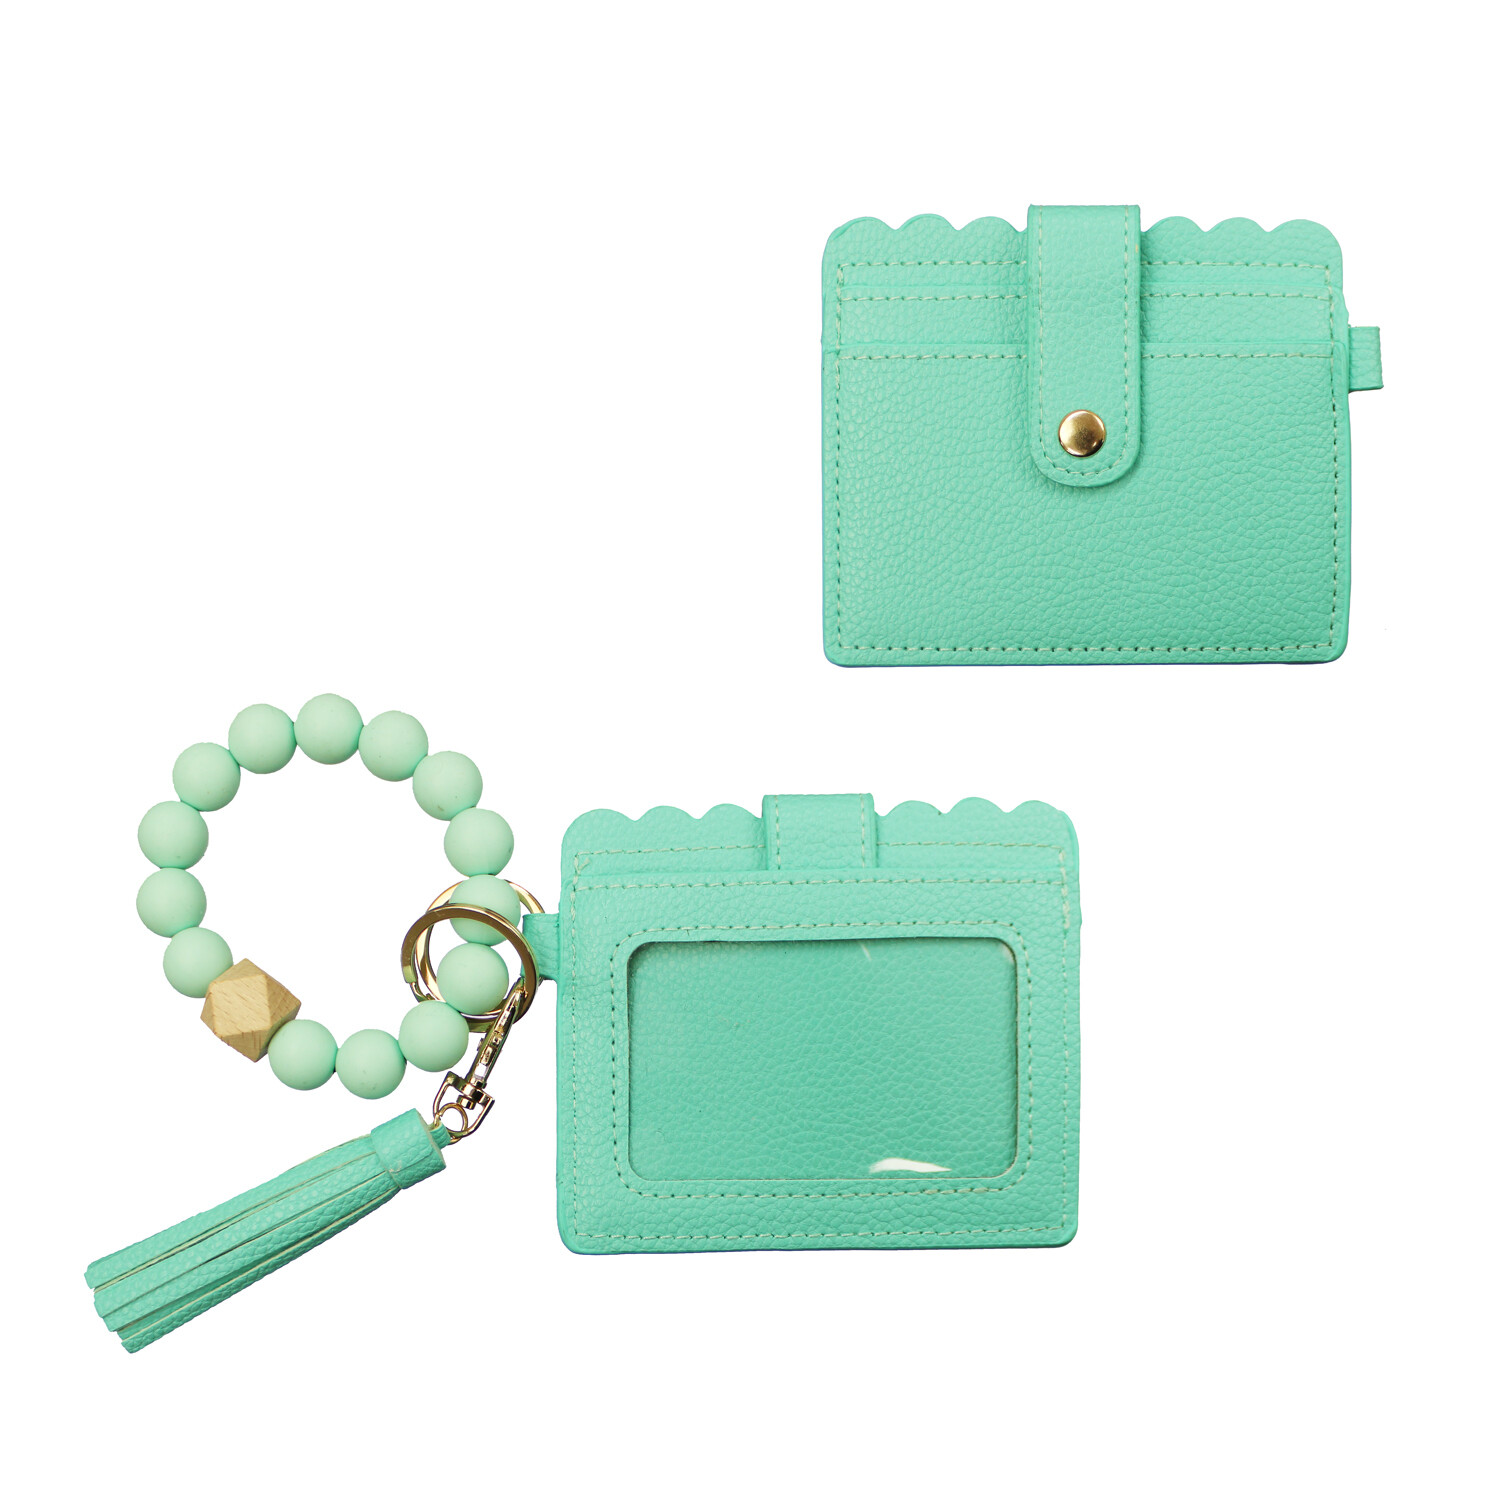 Turquoise/Mint Wristlet with Ball Bangle Keychain